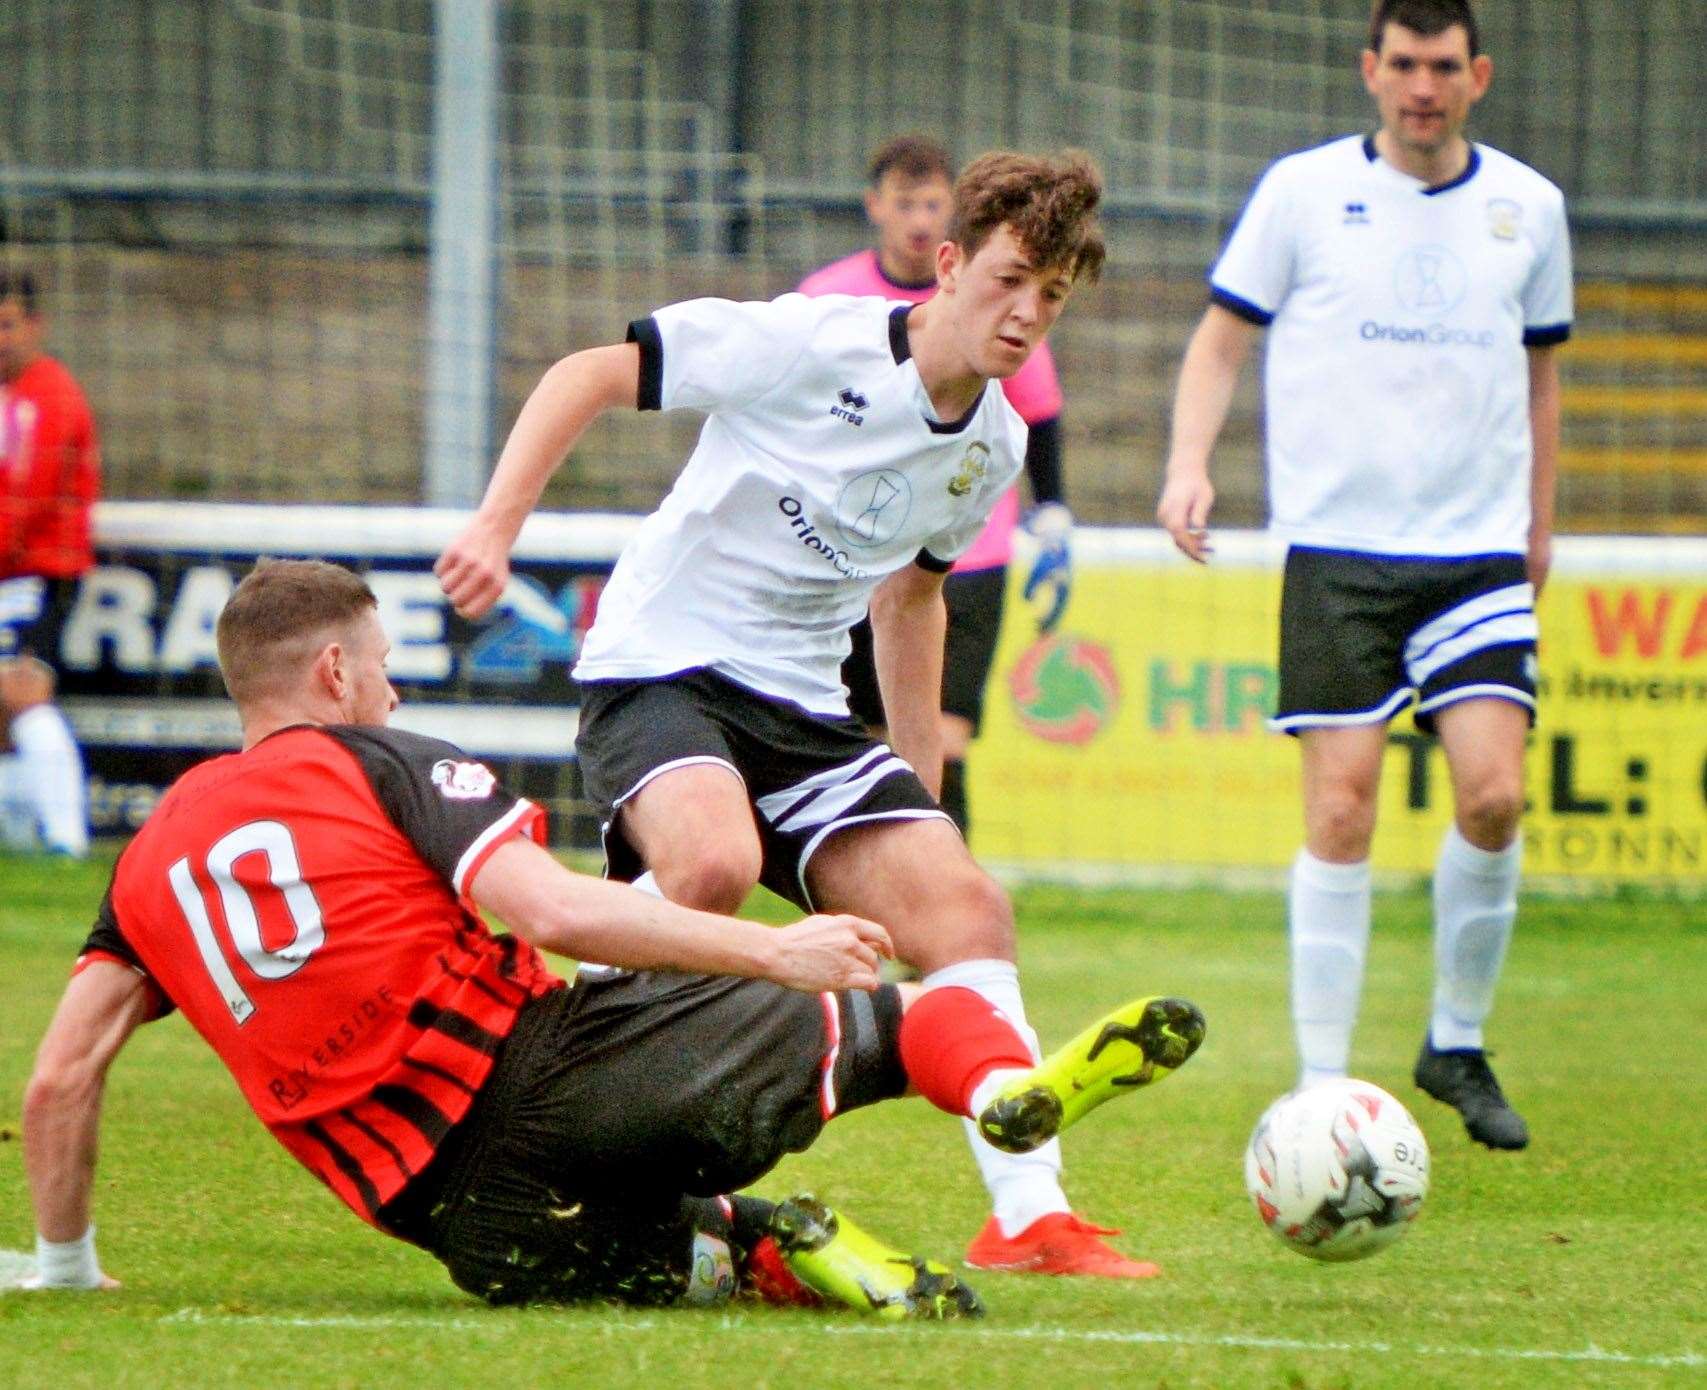 Ali Gillies broke into the Clach first team last season under the watchful eye of manager Brian Macleod. Picture: Gair Fraser. Image No.044387